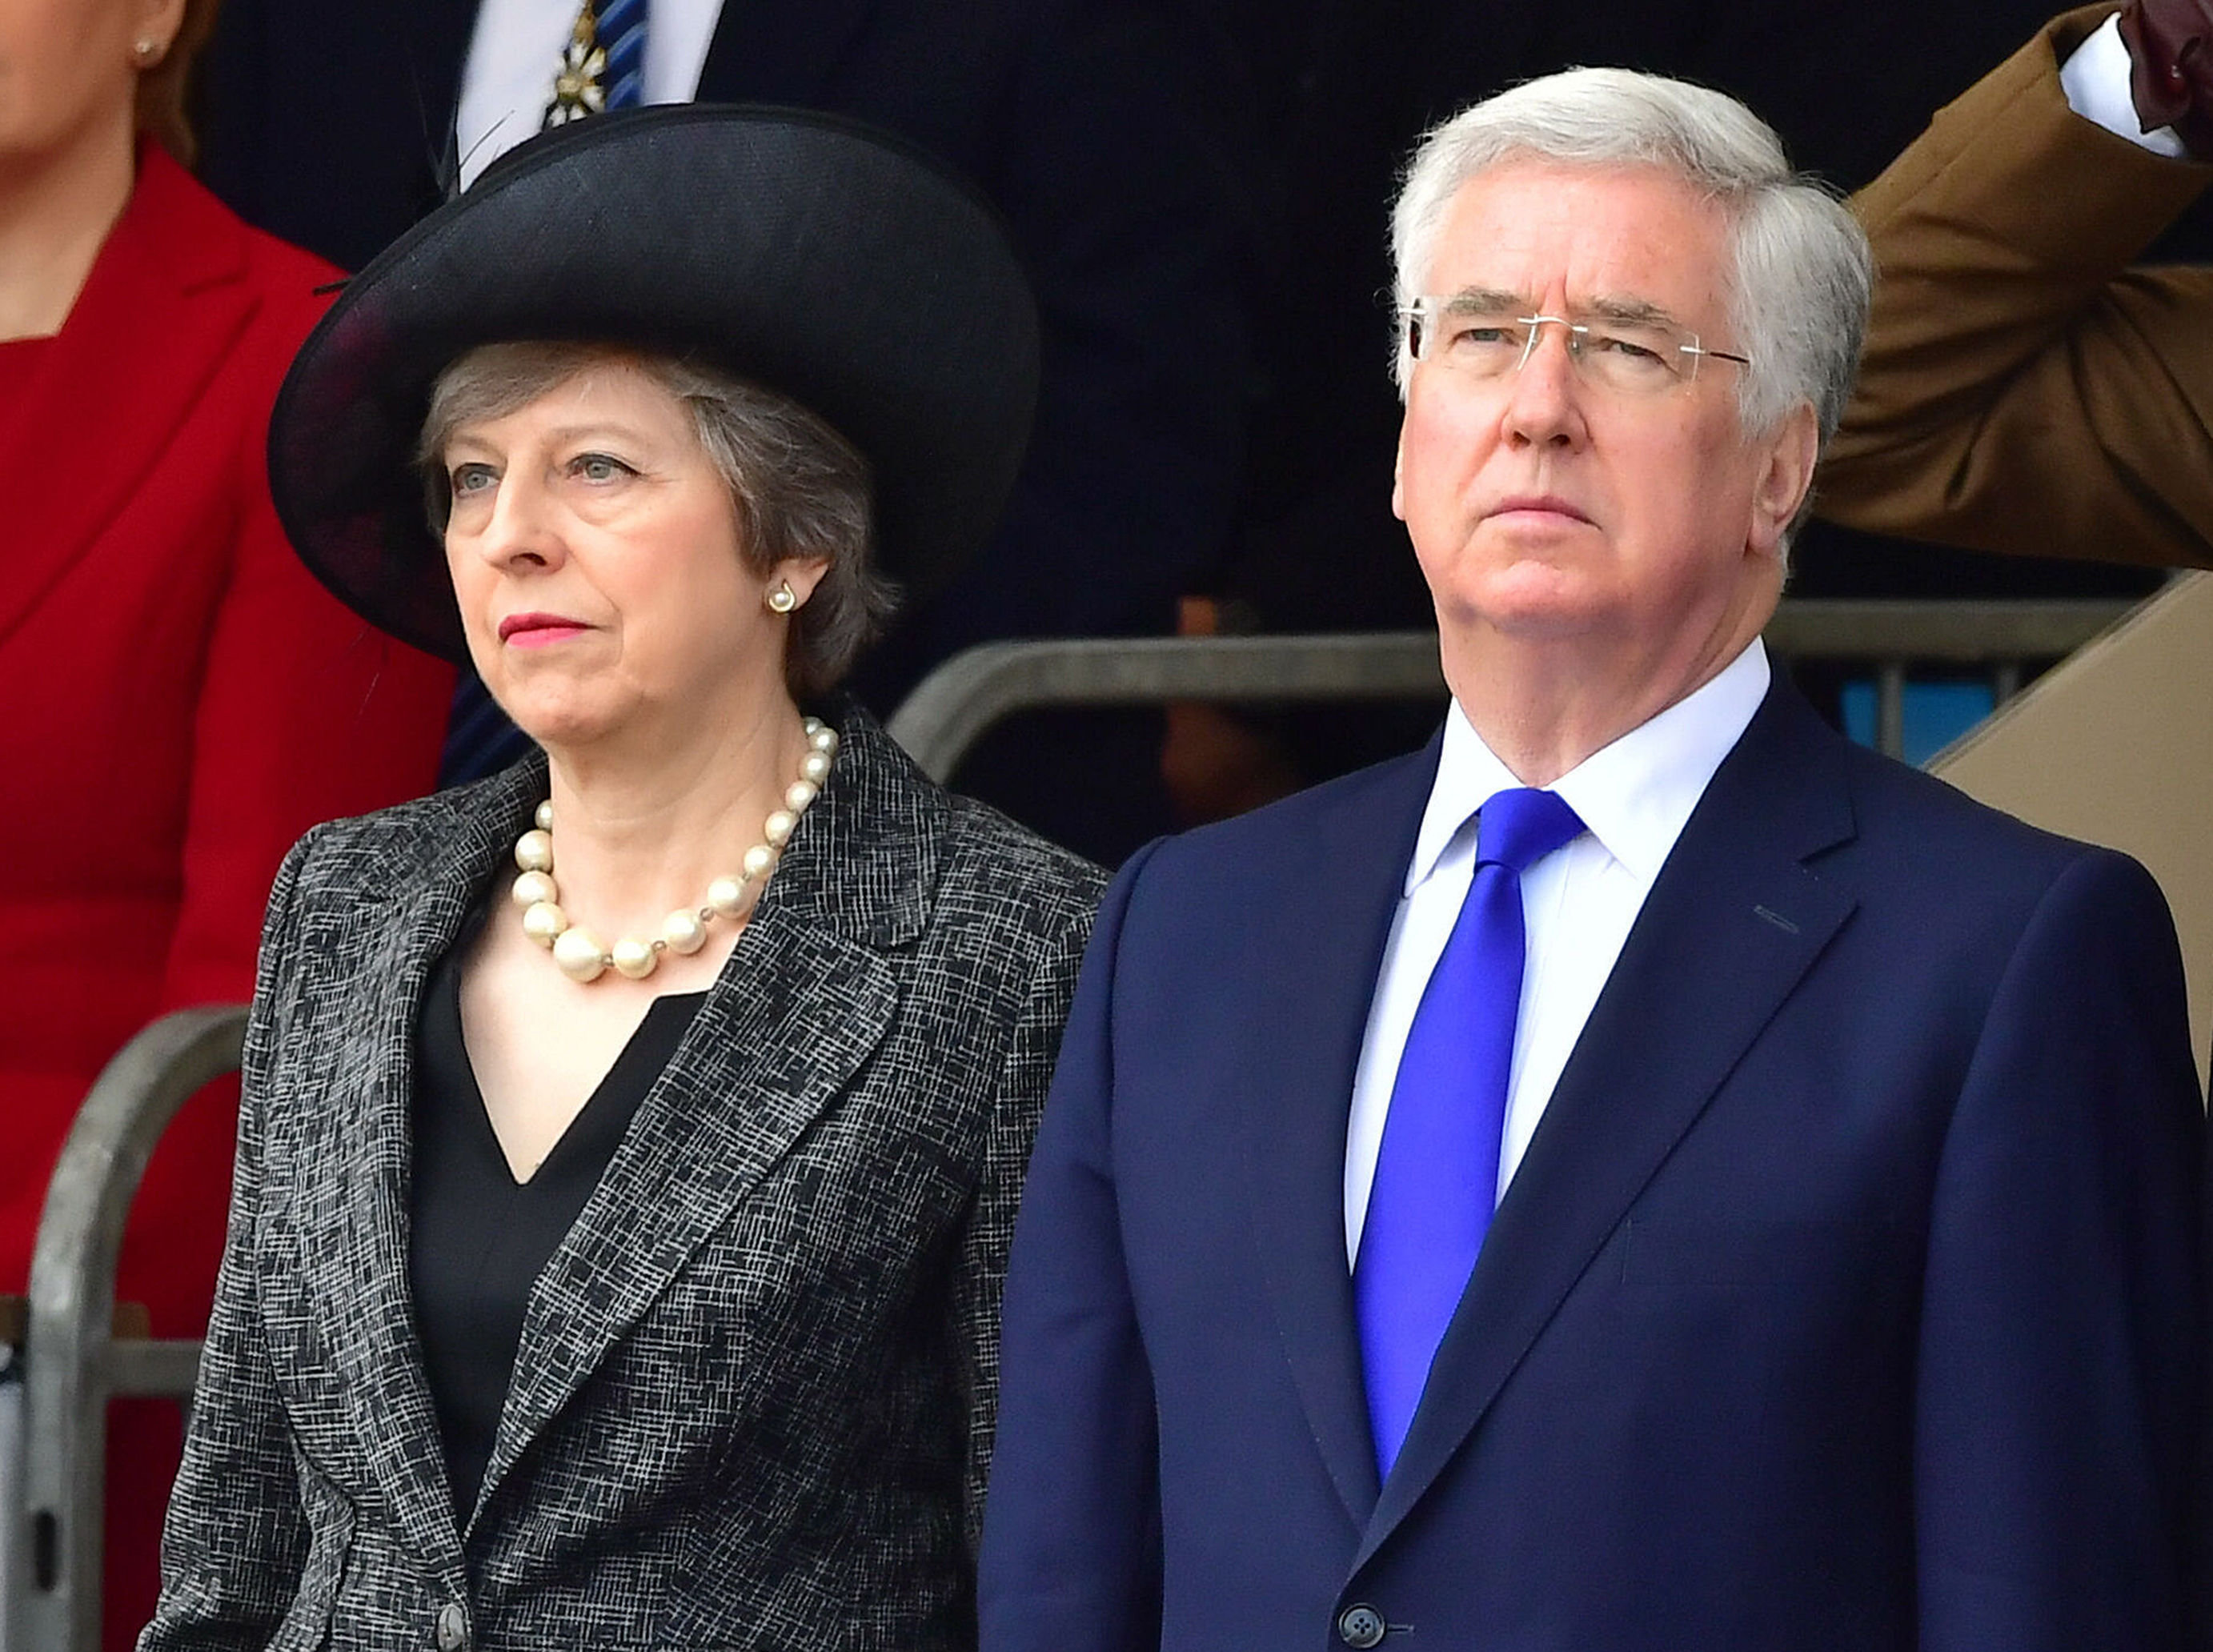 Sir Michael Fallon and Prime Minister Theresa May, who now has to appoint a new Defence Secretary.